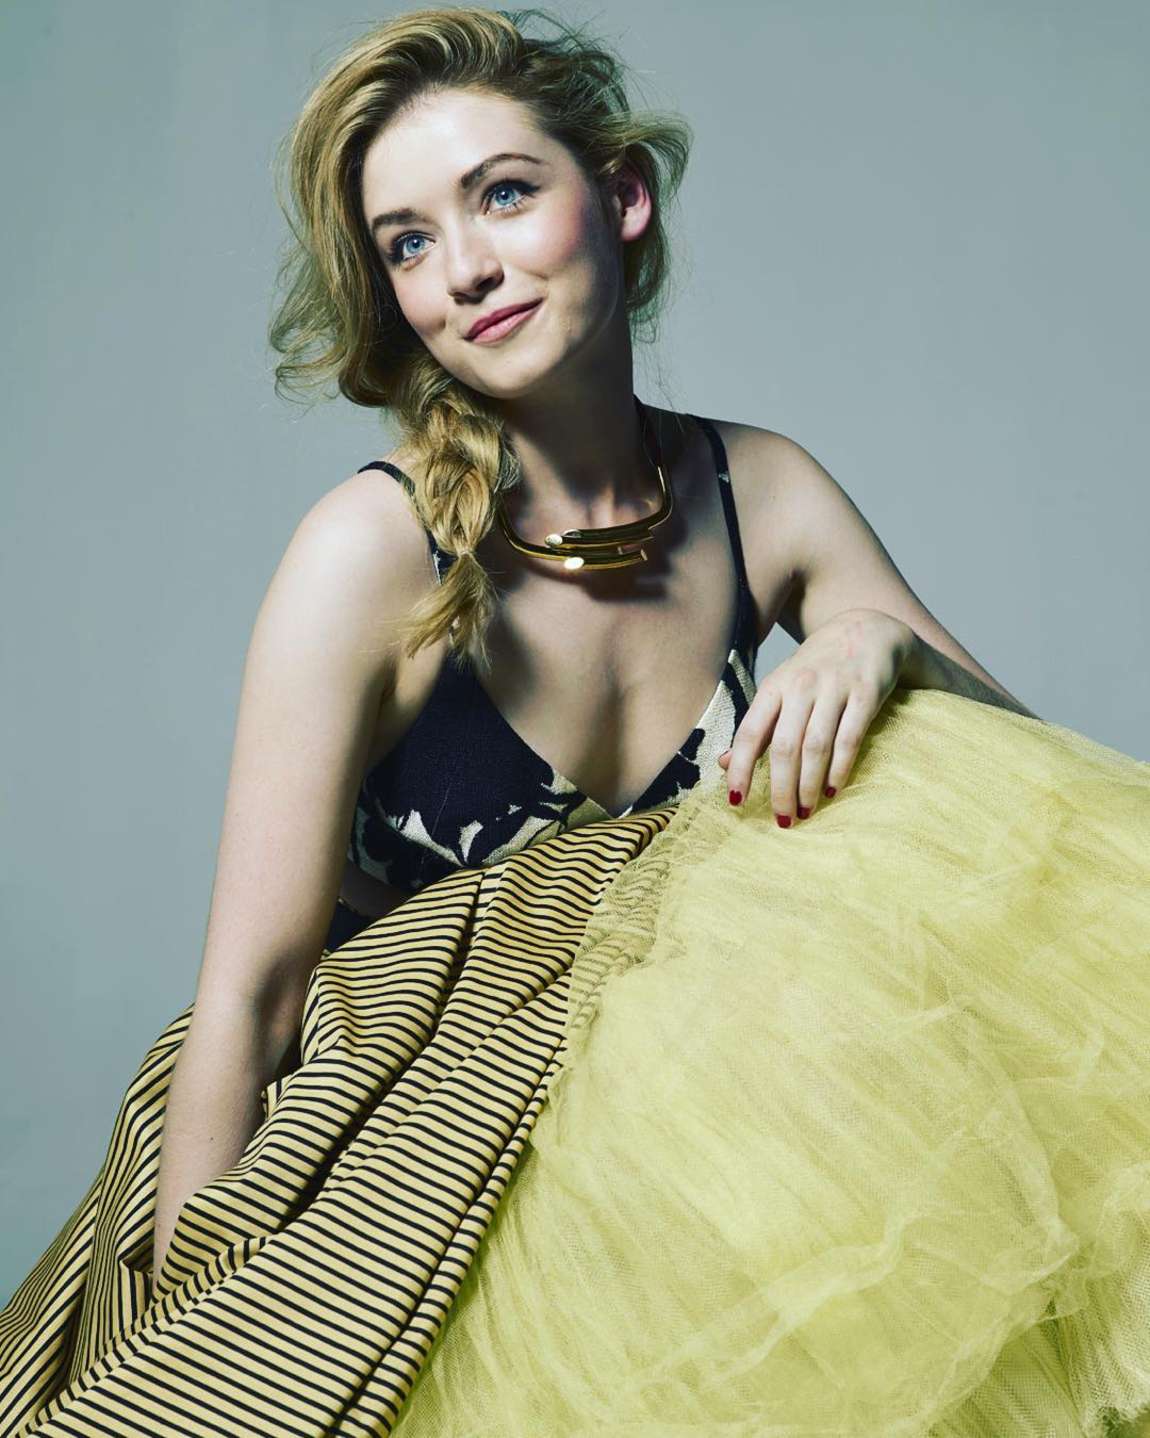 60+ Hot Pictures Of Sarah Bolger Which Are Stunningly Ravishing | Best Of Comic Books